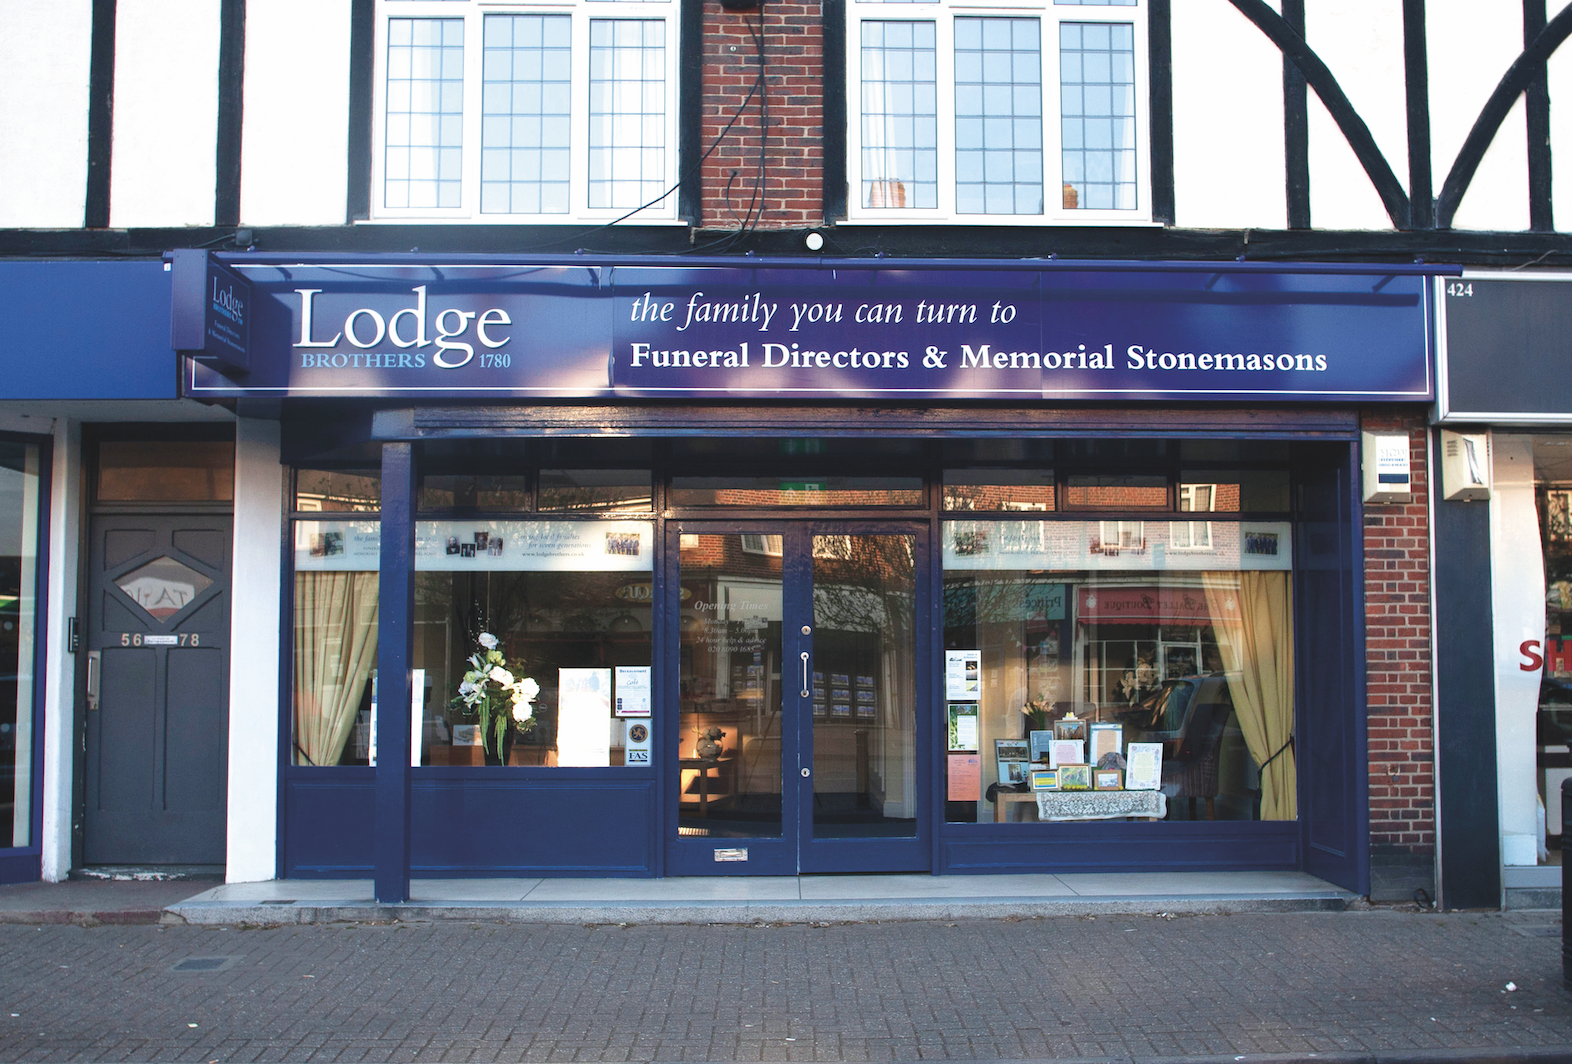 Lodge Brothers Branch